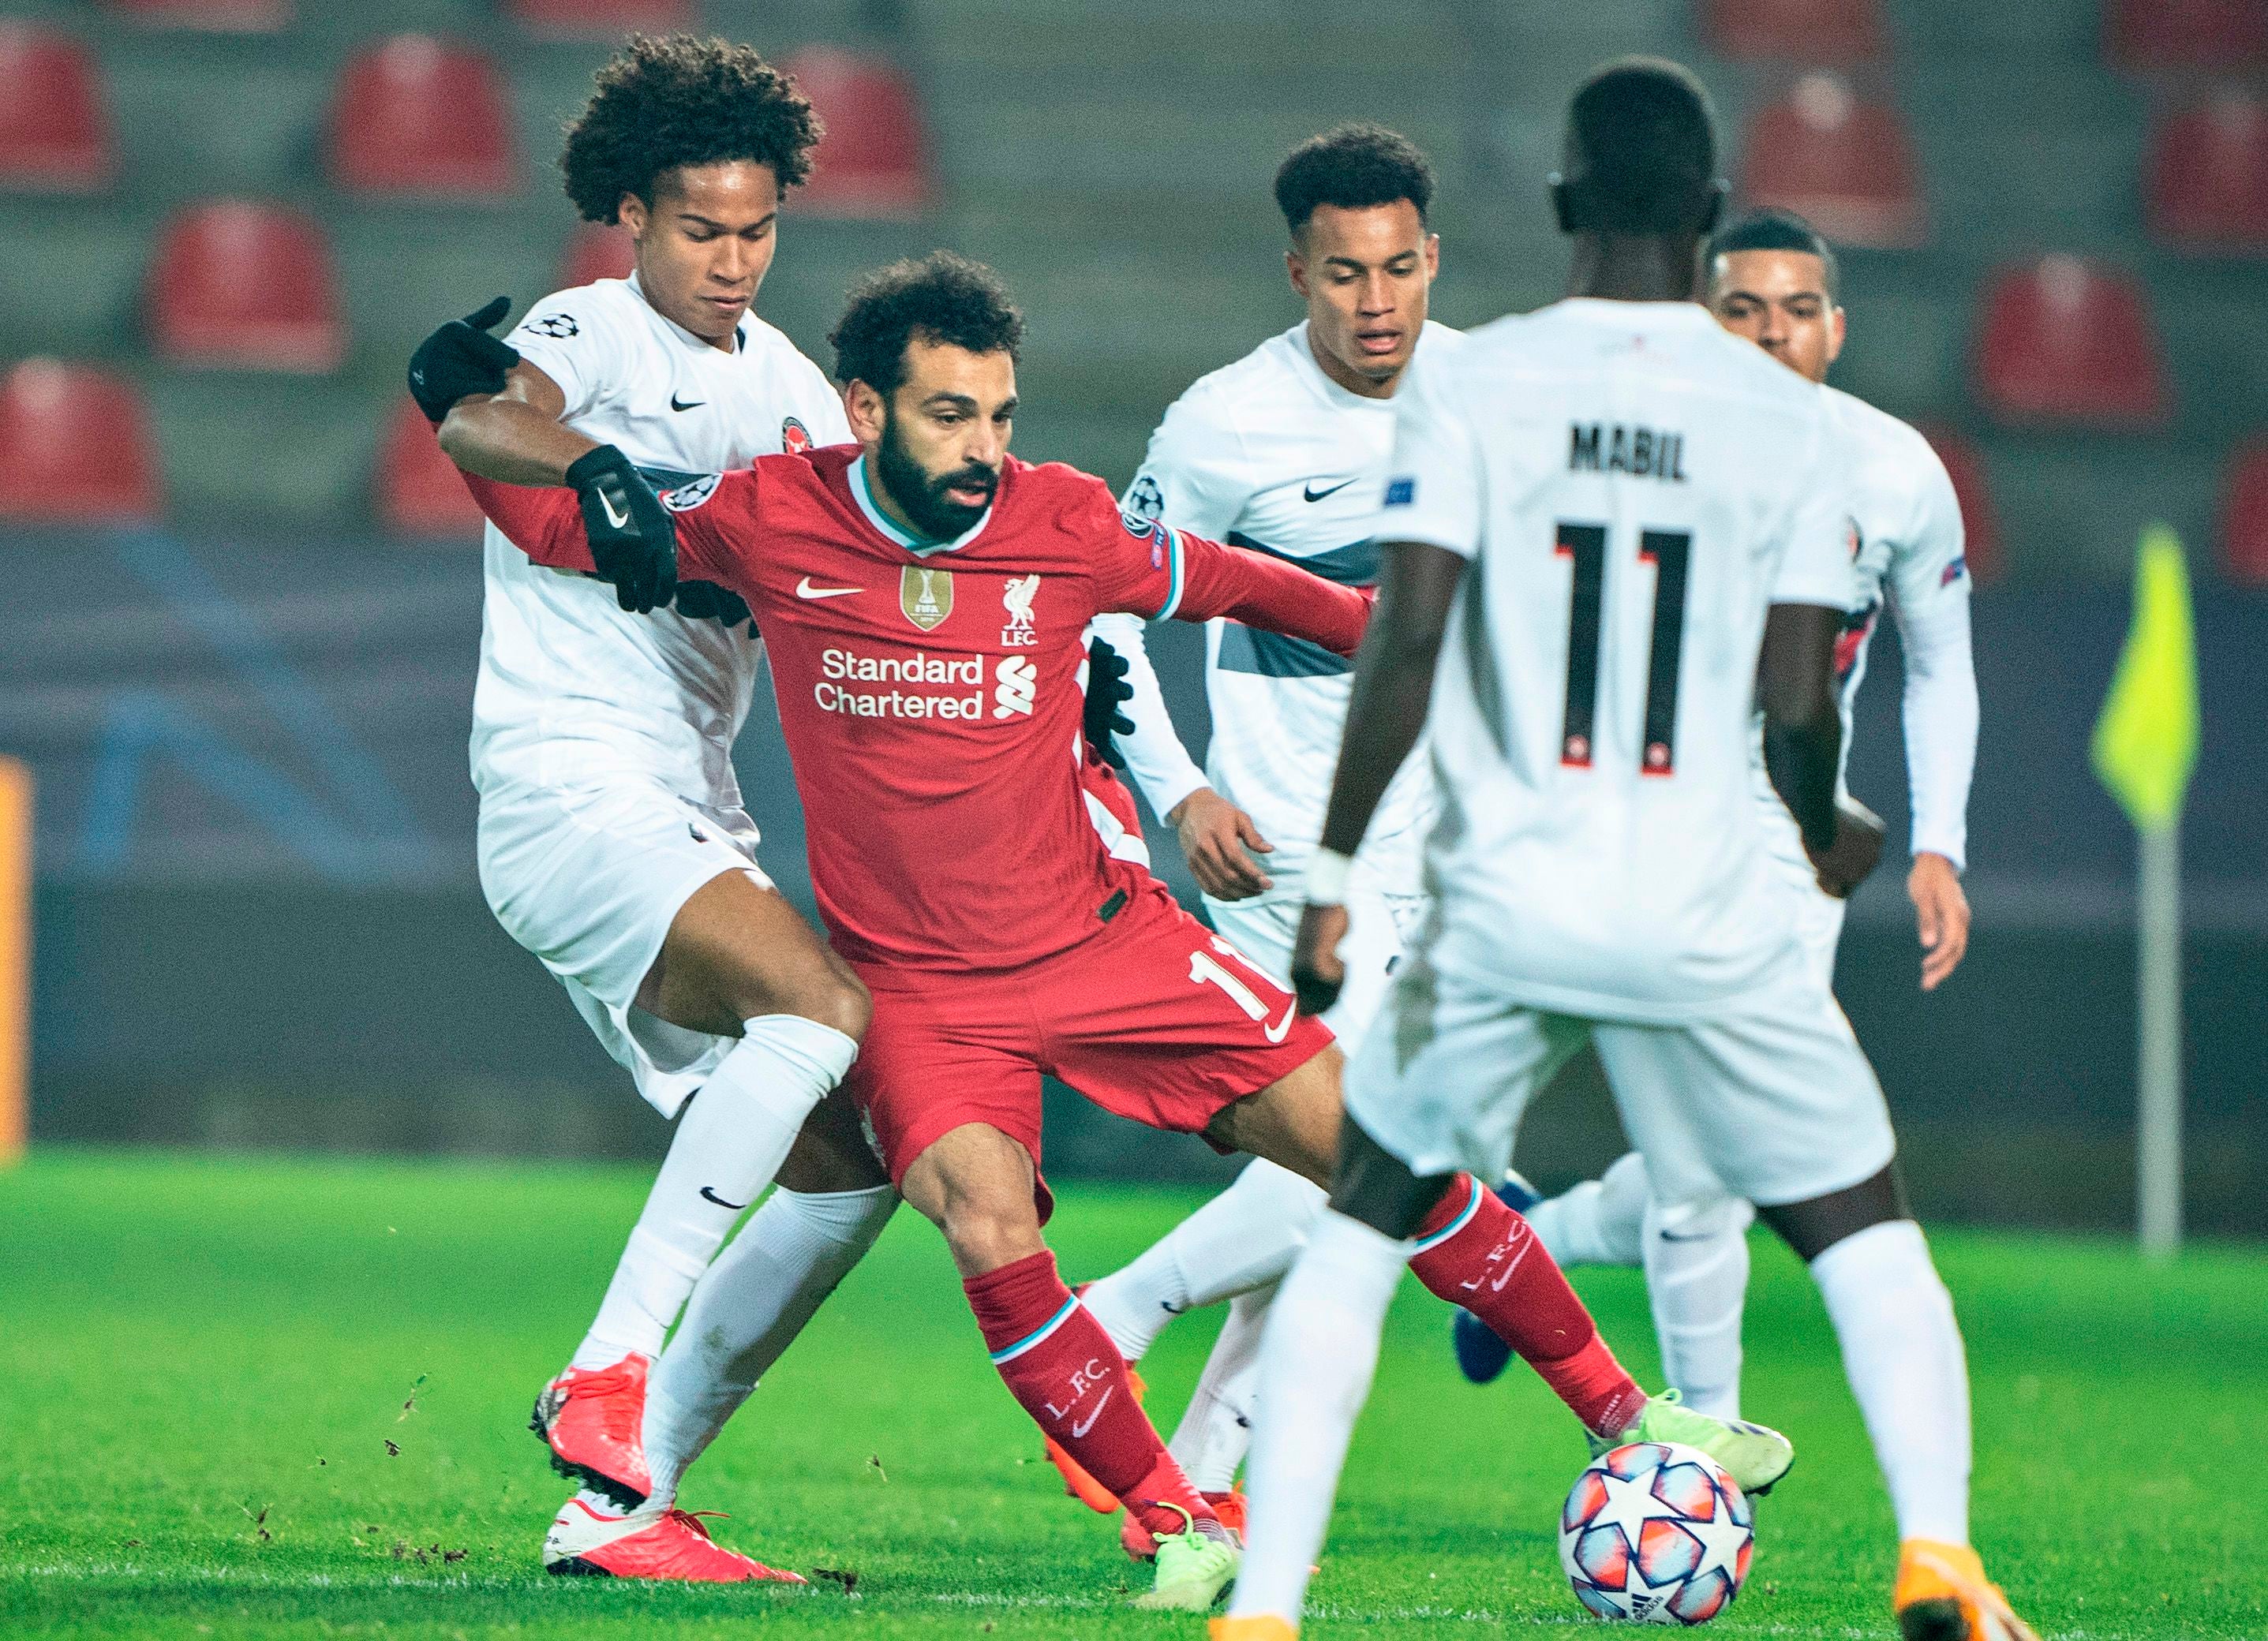 Mohamed Salah played the duration of Liverpool’s 1-1 draw with FC Midtjylland